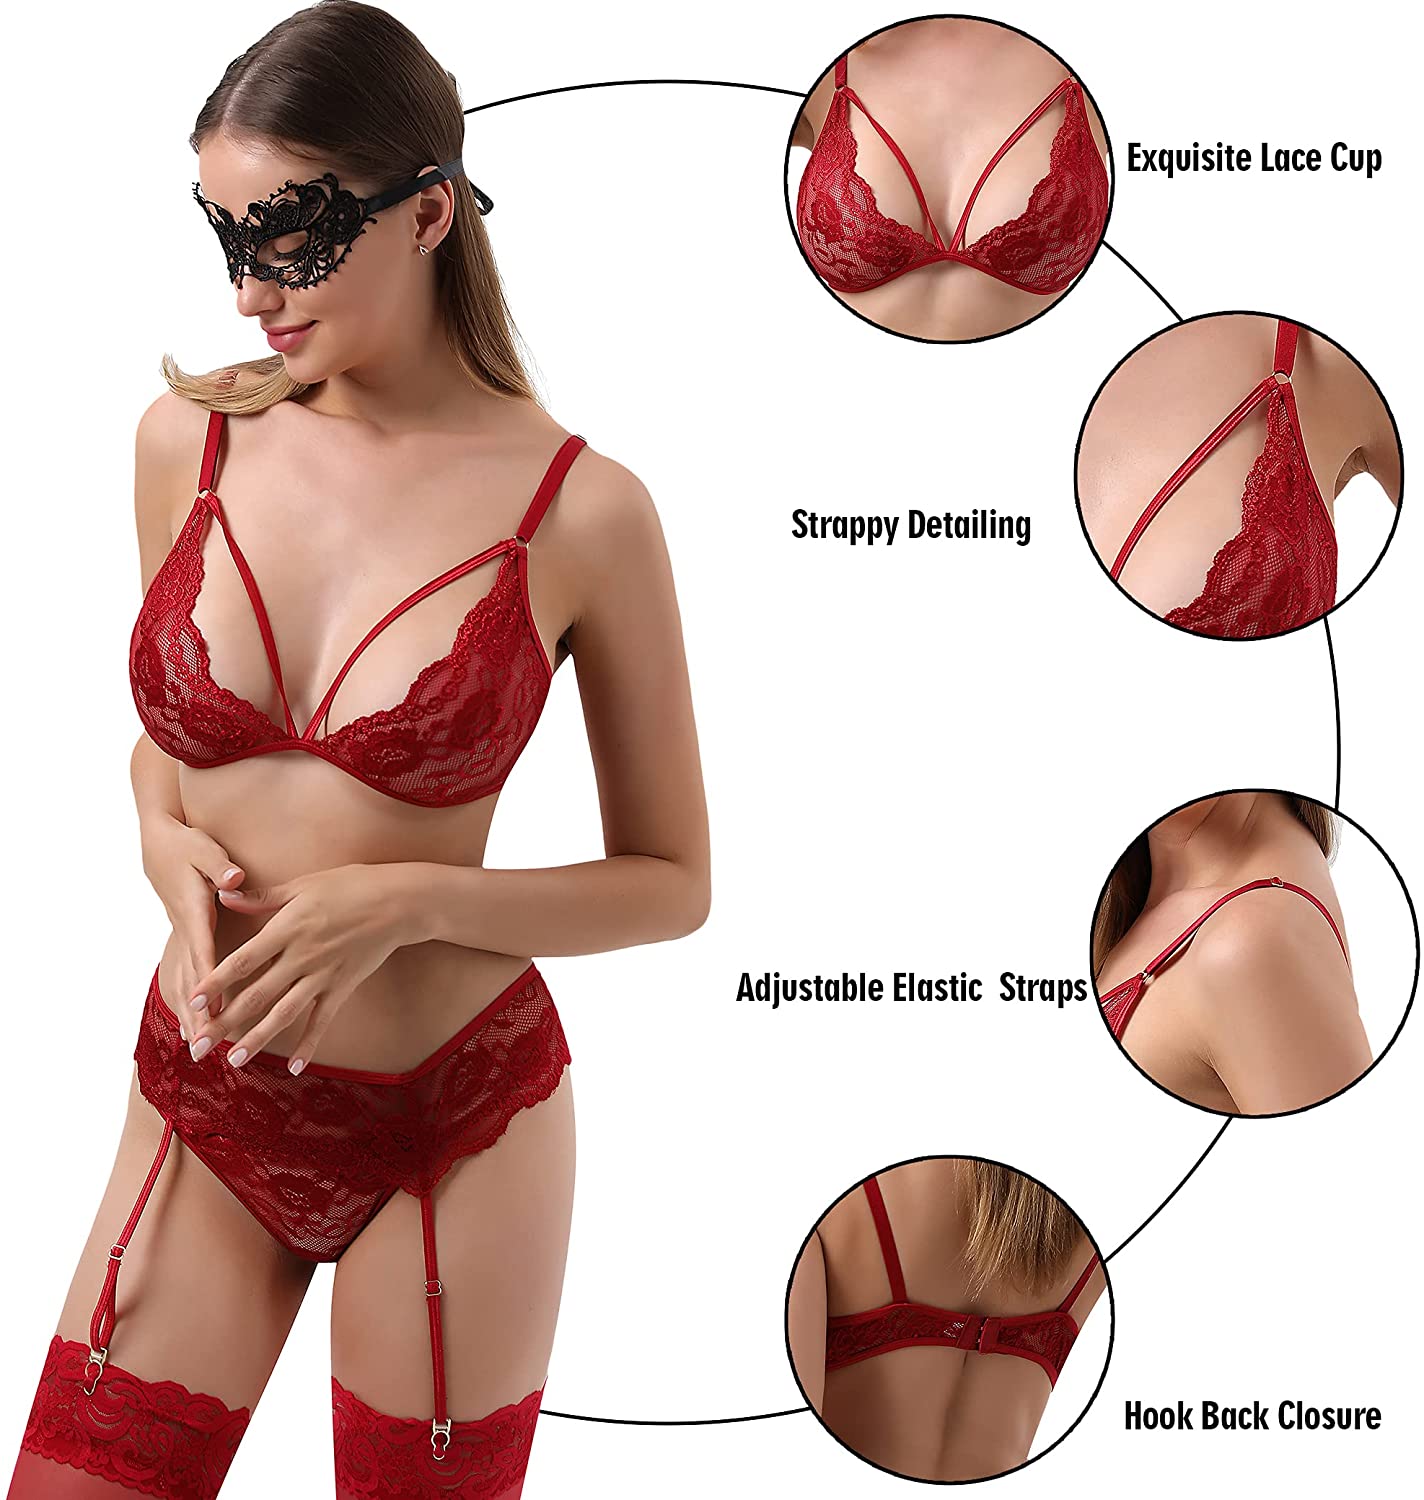 Lidogirls Women Lingerie Set Garter Belt with Stocking And Lace Eye Mask (RED)